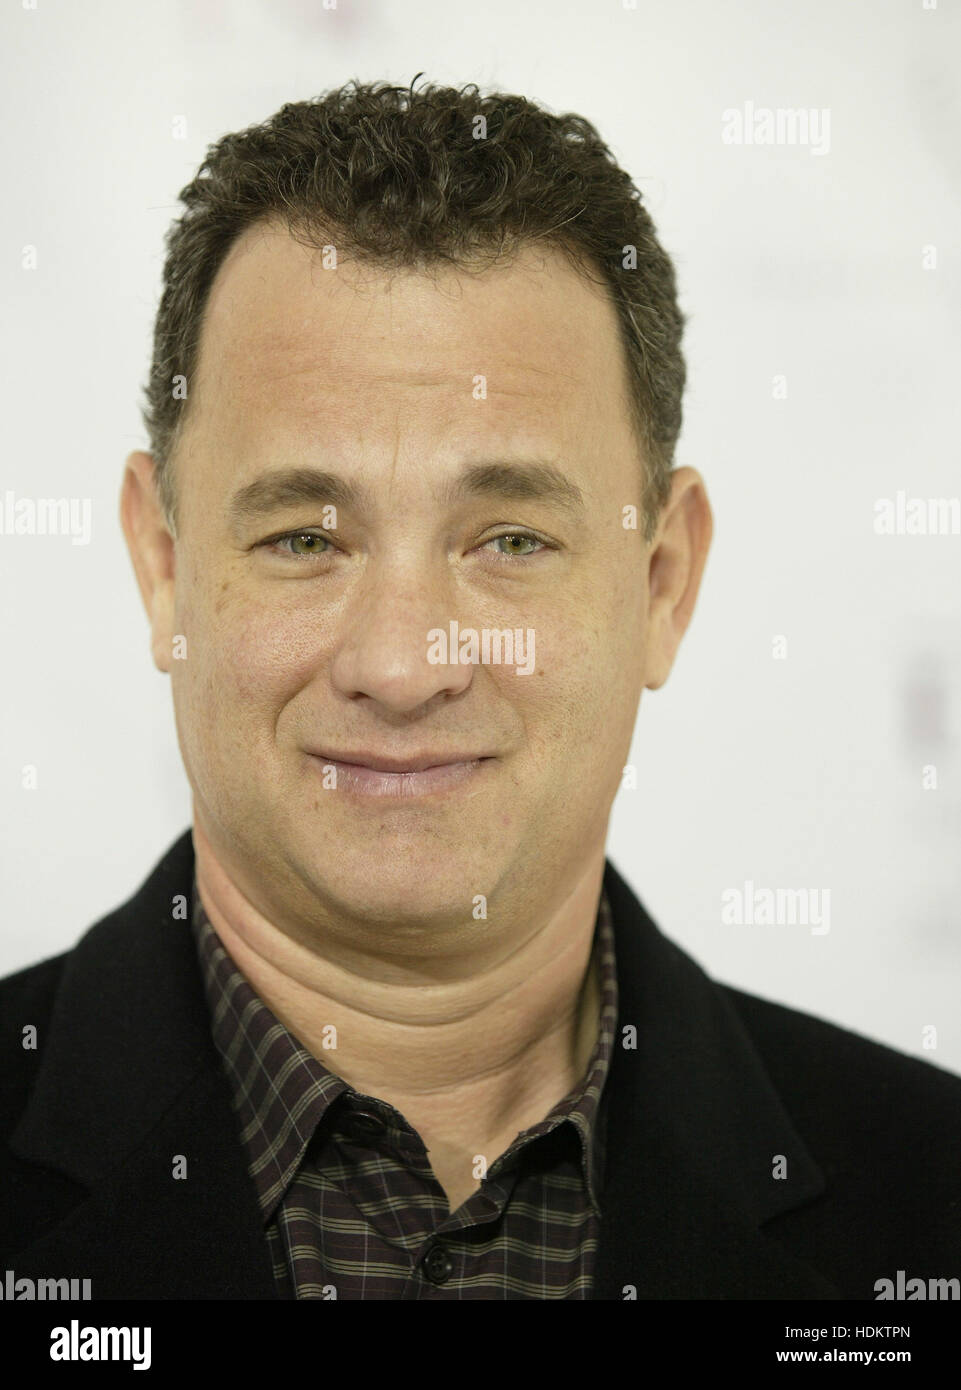 Tom Hanks at the premiere for 'Polar Express' on November 7, 2004 in Los Angeles, California. Photo credit: Francis Specker Stock Photo